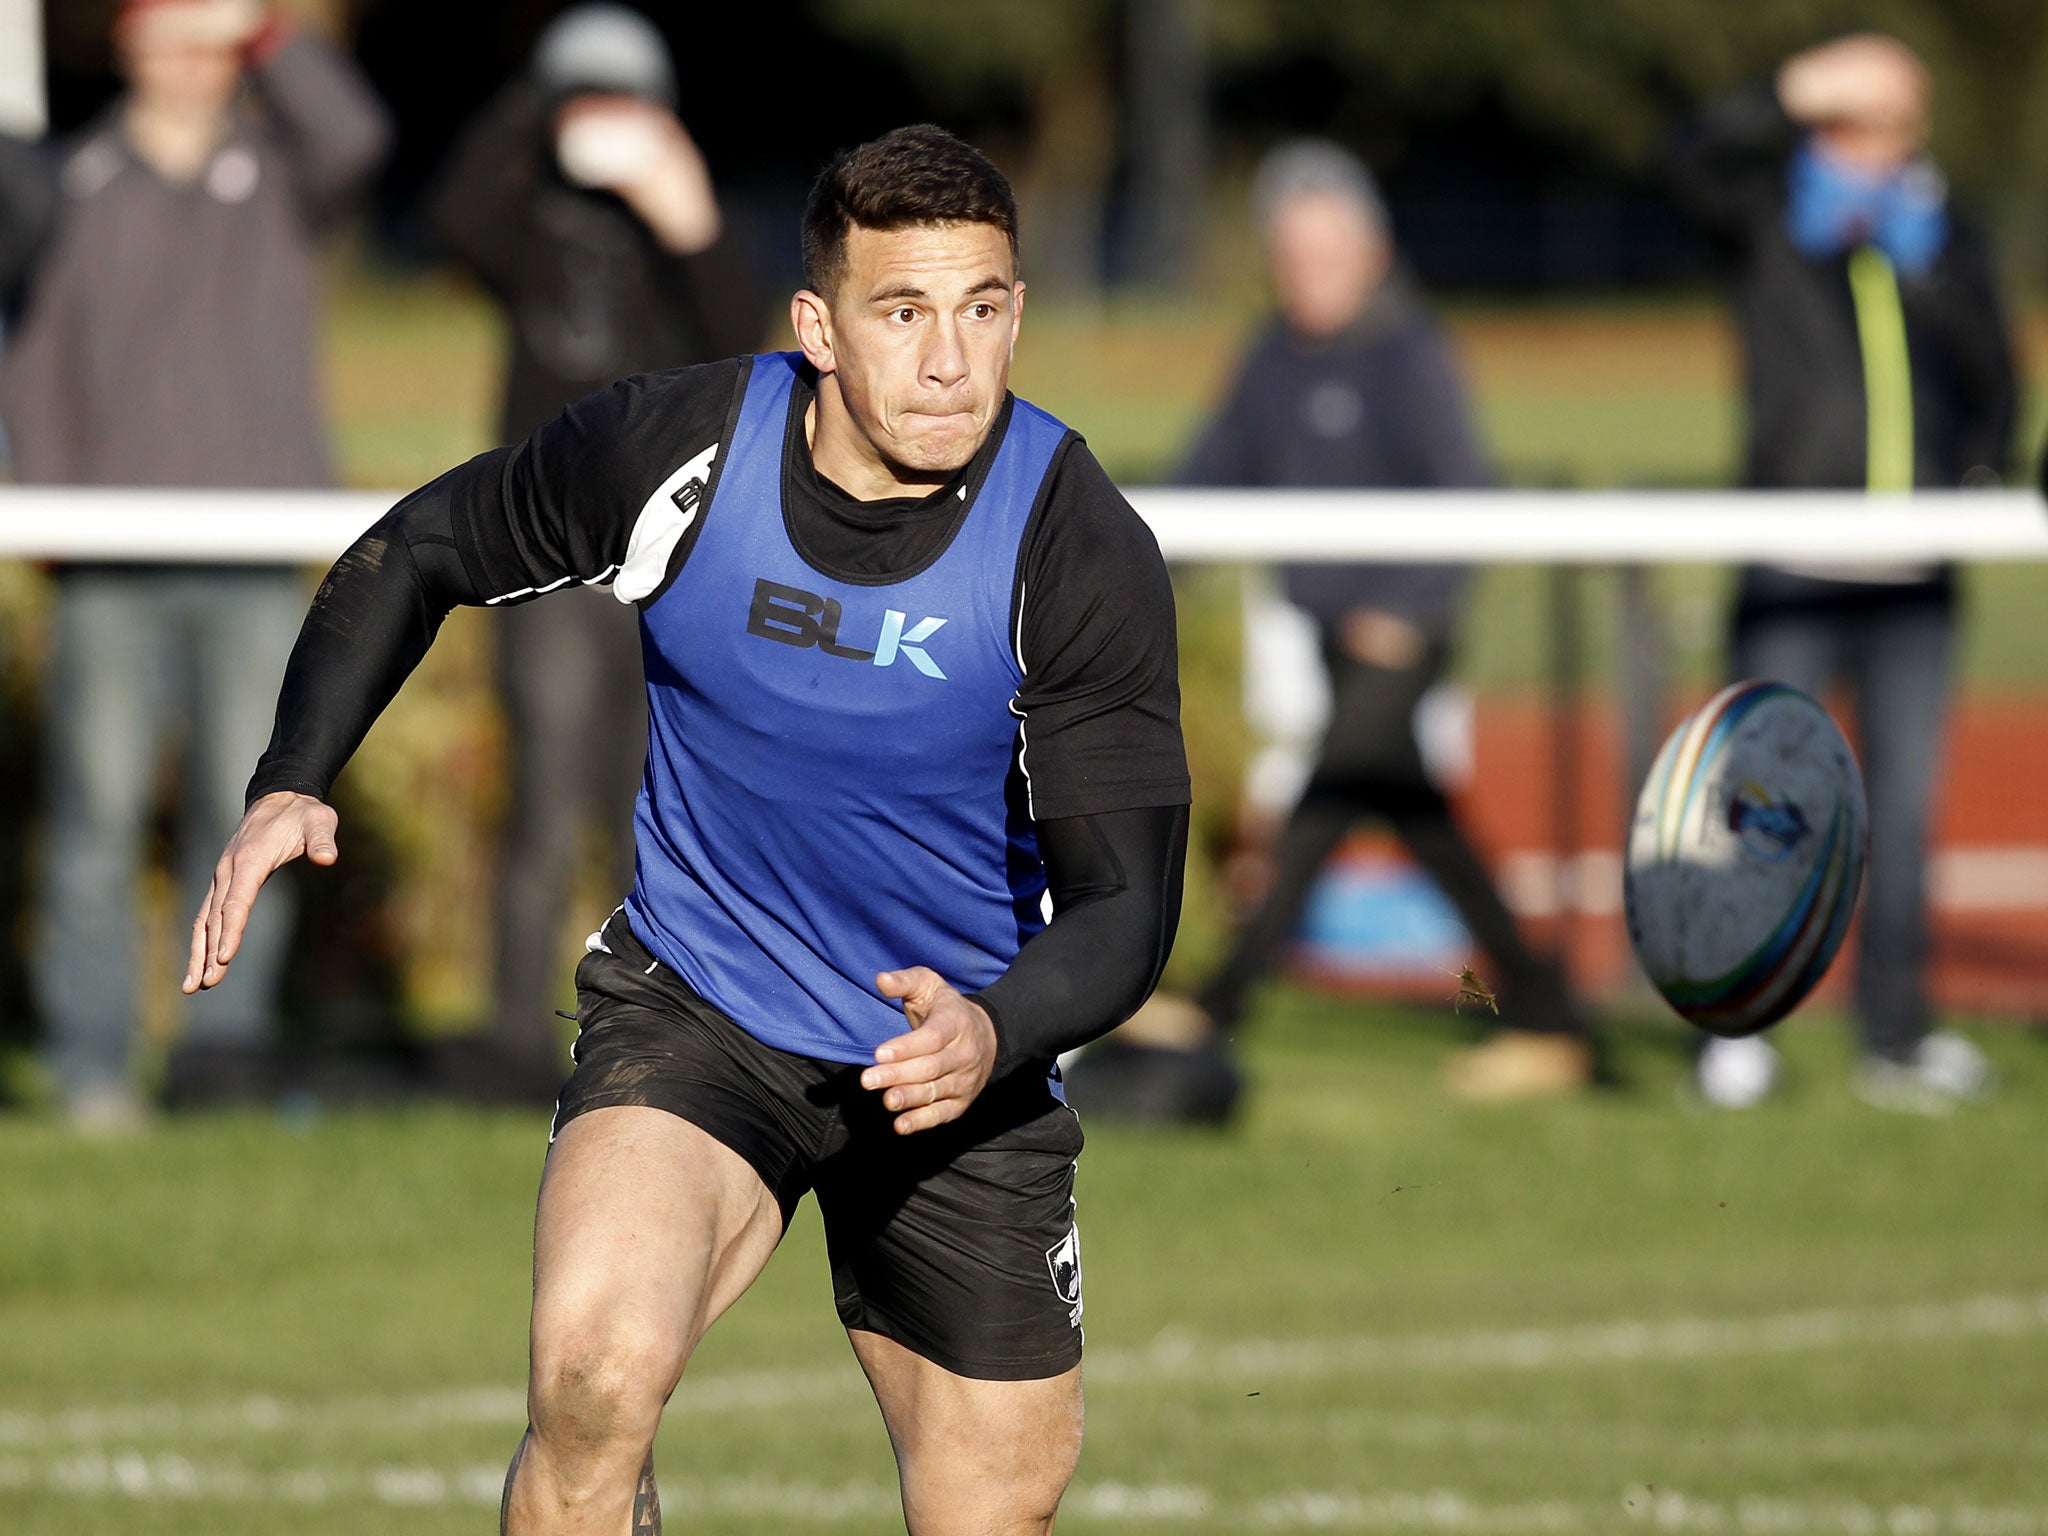 New Zealand's Sonny Bill Williams will pose a huge threat to the Australians in tthes World Cup final at Old Trafford – but can he help them retain their crown?